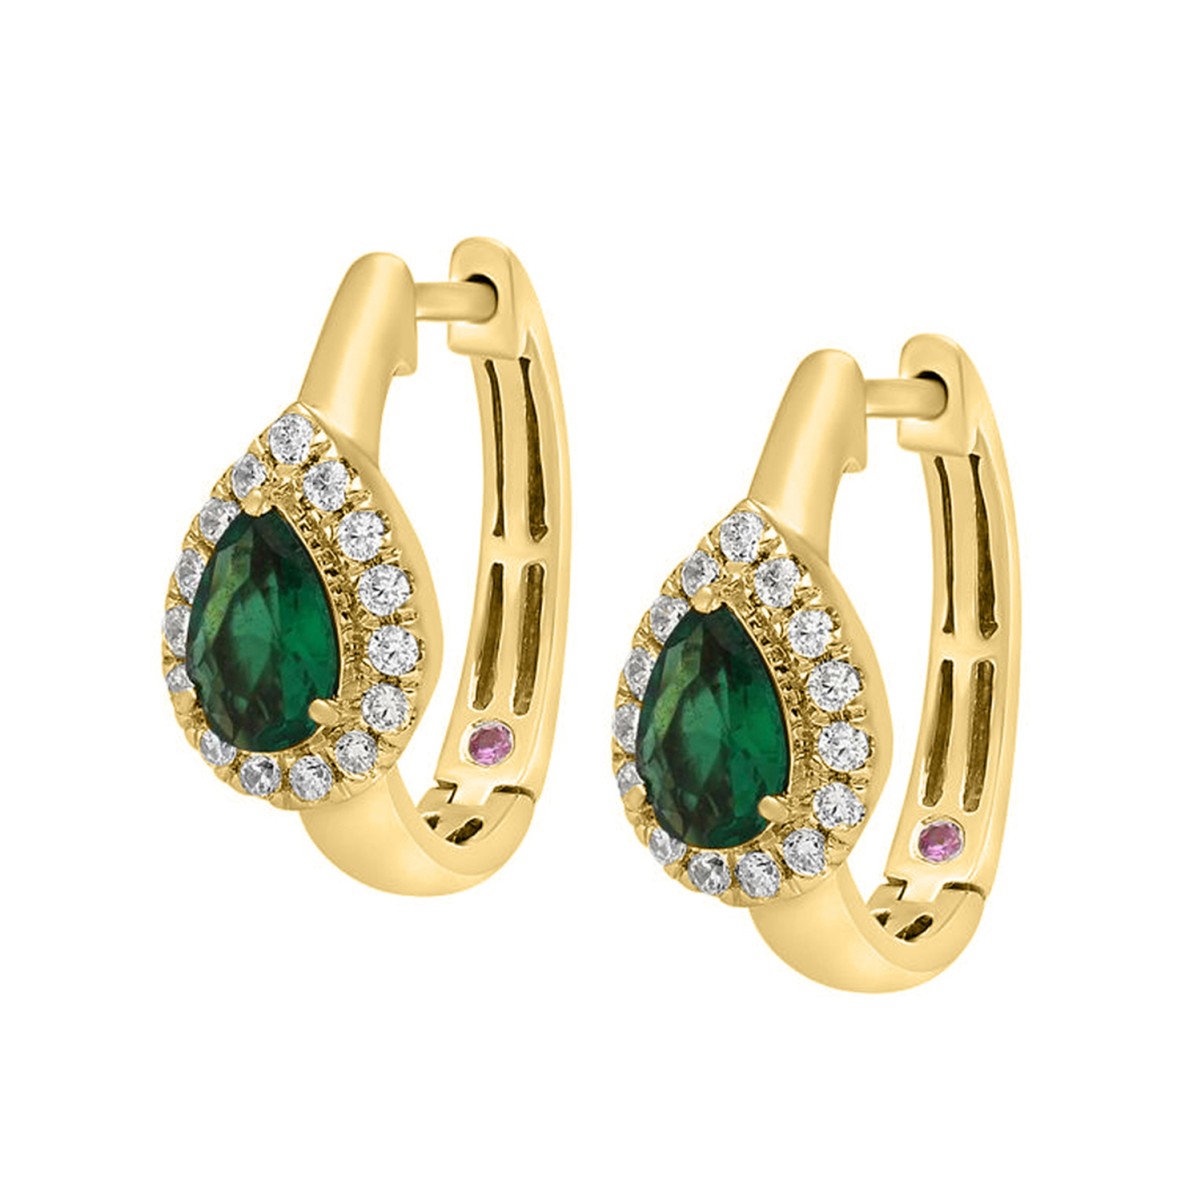 18K YELLOW GOLD 1CT ROUND/PEAR DIAMOND LADIES HOOPS EARRINGS(COLOR STONE PEAR GREEN EMERALD DIAMOND 3/4CT)